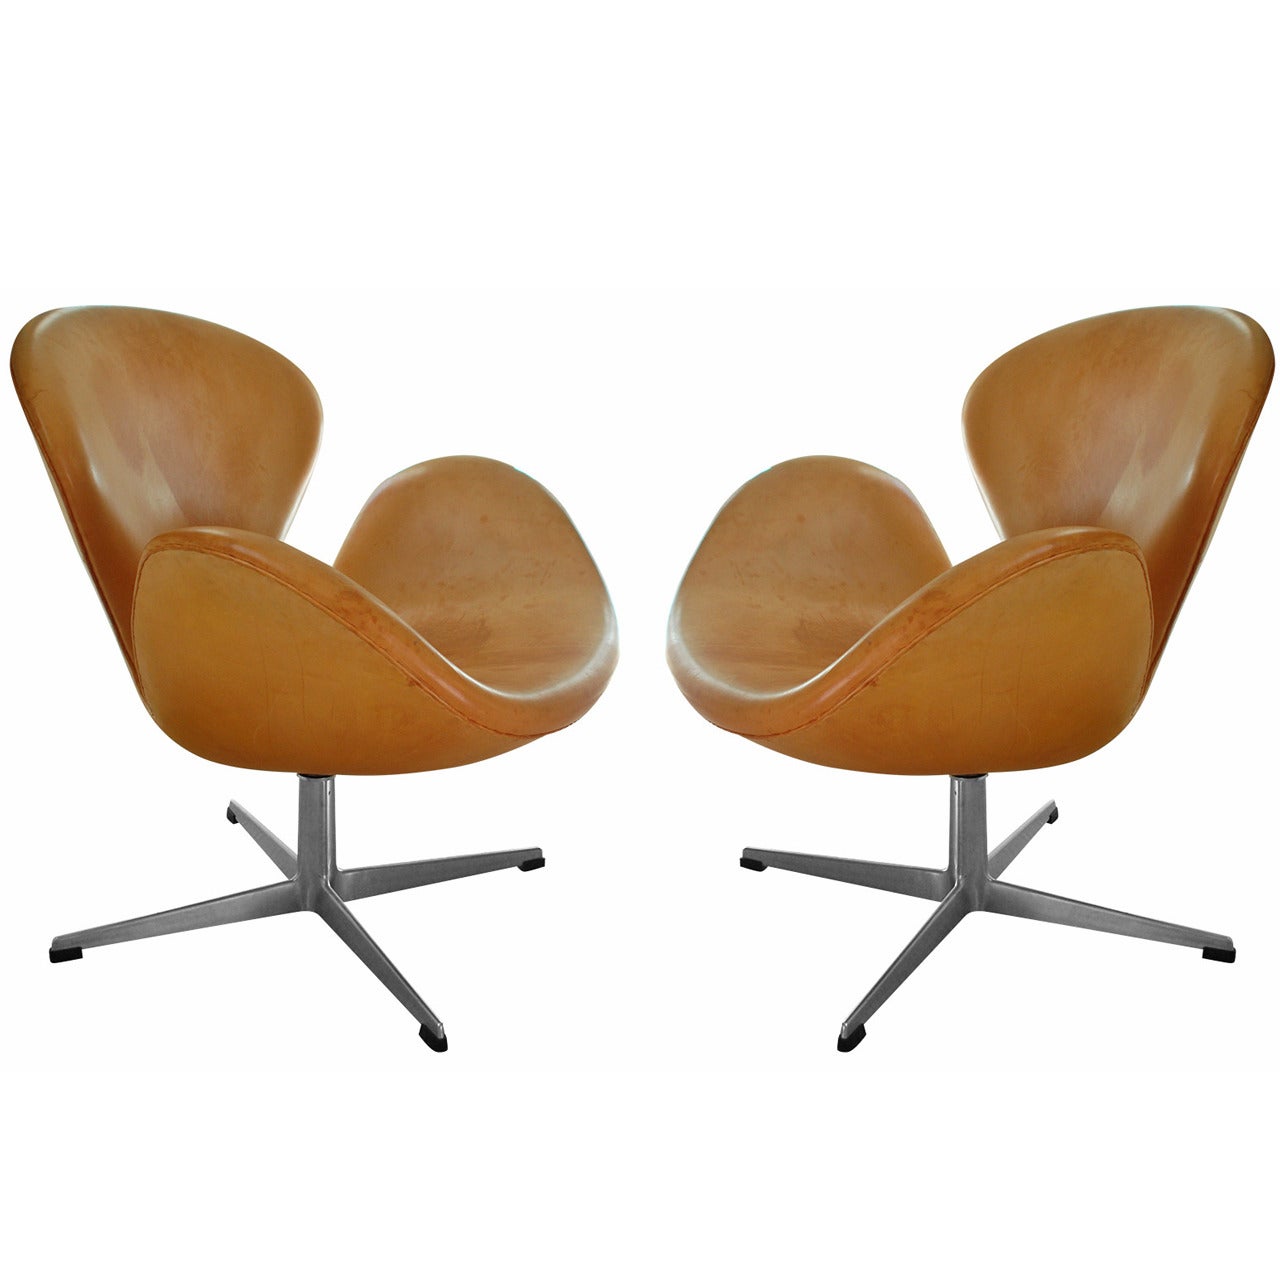 Rare Natural Leather Early Swan Chairs by Arne Jacobsen, circa 1963 For Sale